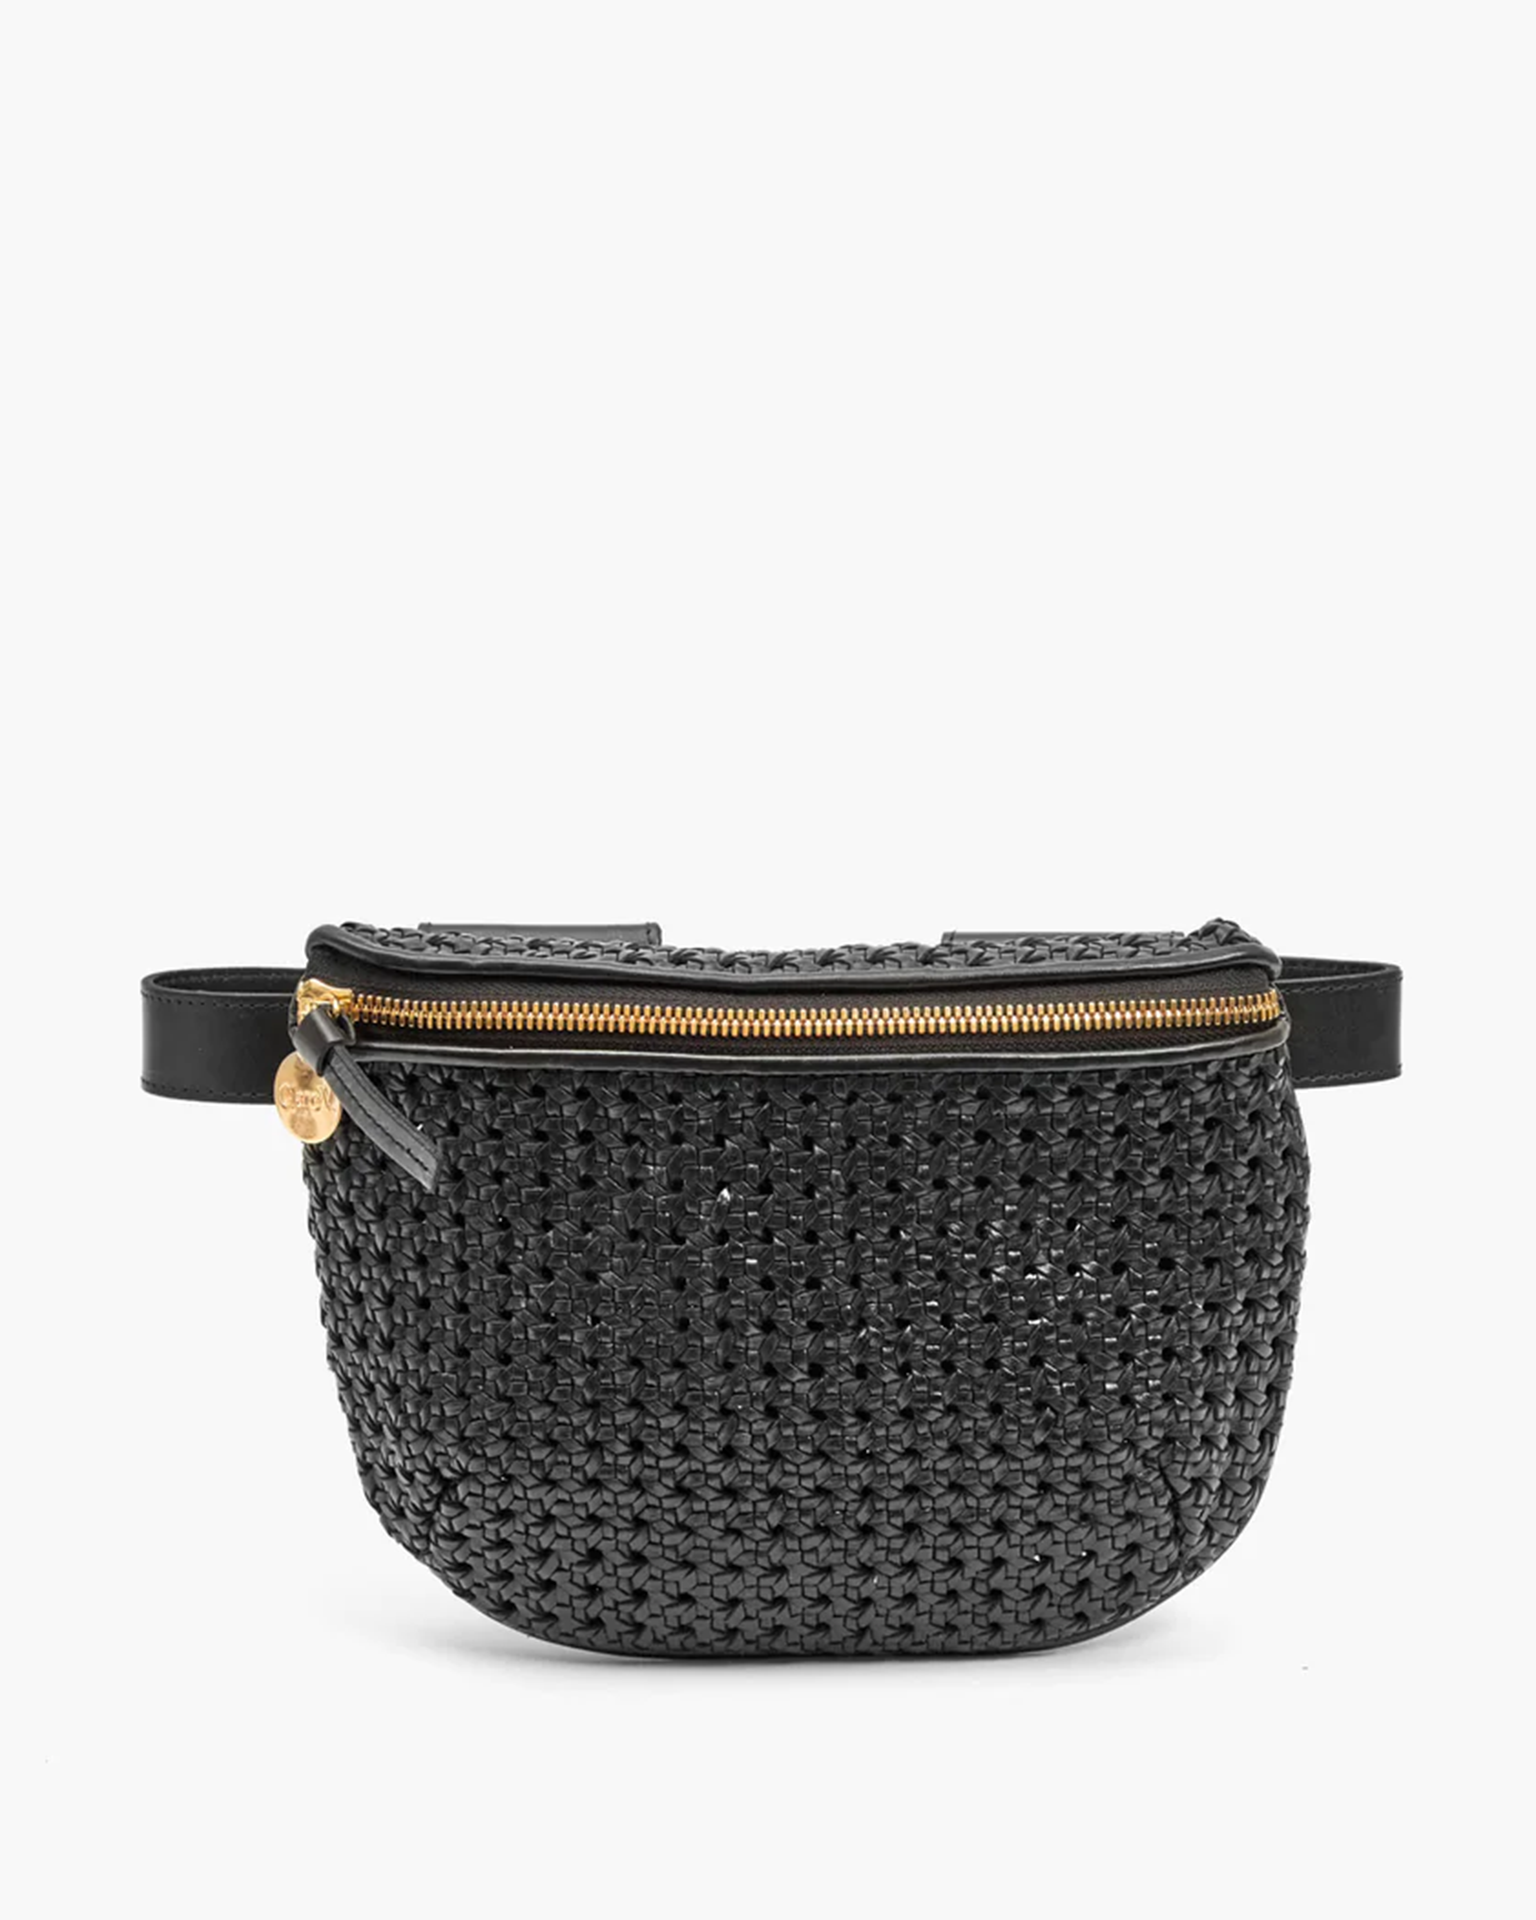 Clare V. Rattan Fanny Pack in Black- Bliss Boutiques